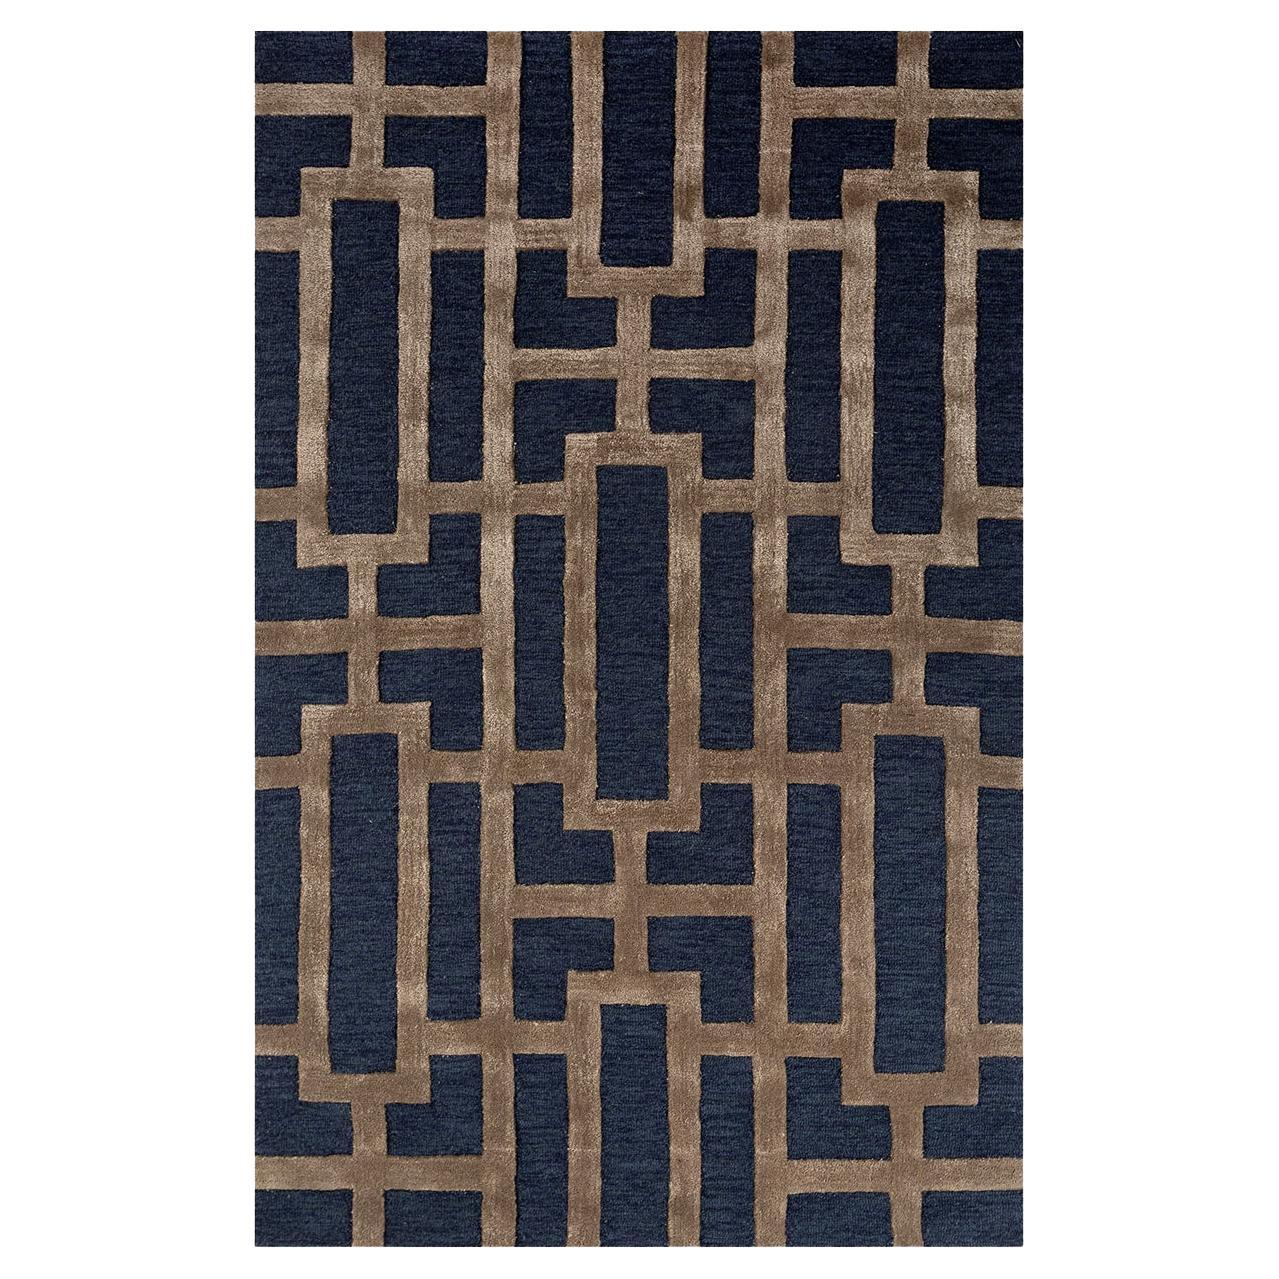 Deco Rug by Rural Weavers, Tufted, Wool, Viscose, 240x300cm For Sale